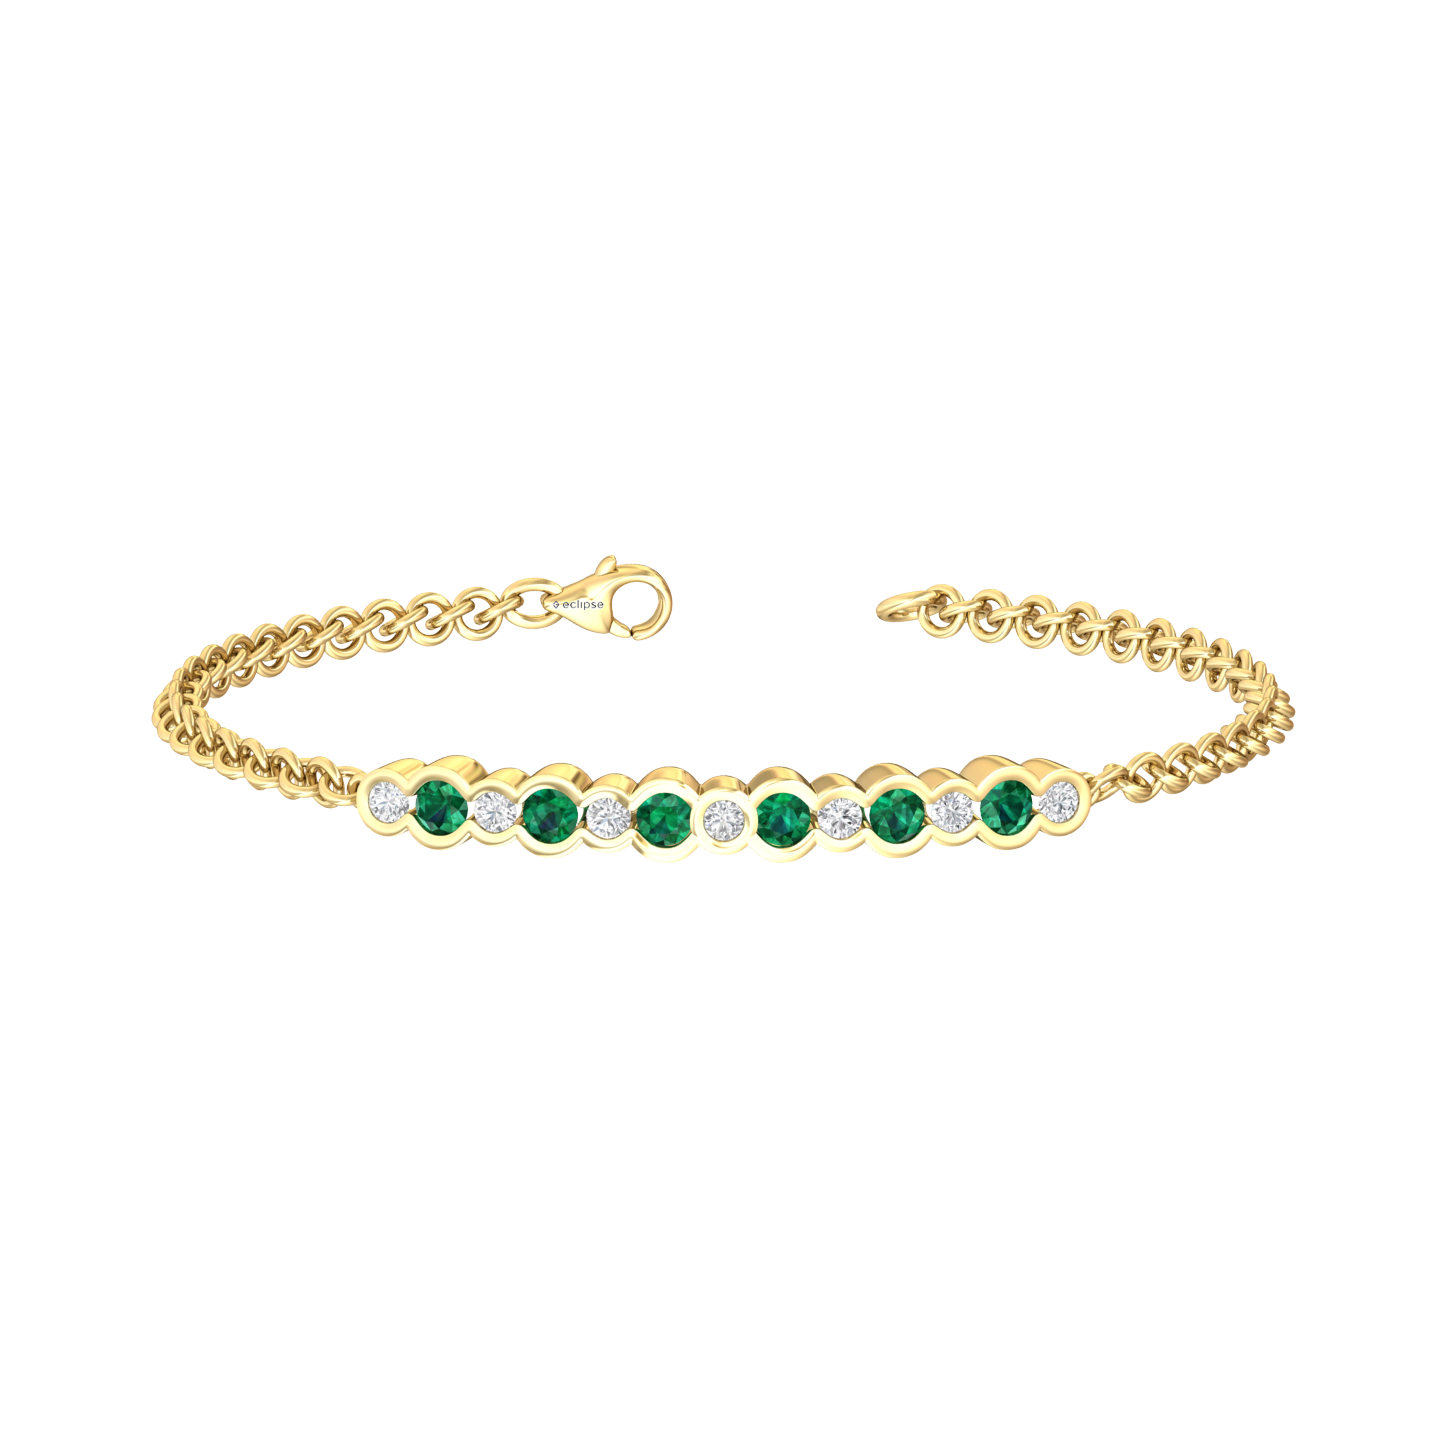 Eclipse Collection Emerald and Diamond Bracelet  Gardiner Brothers   